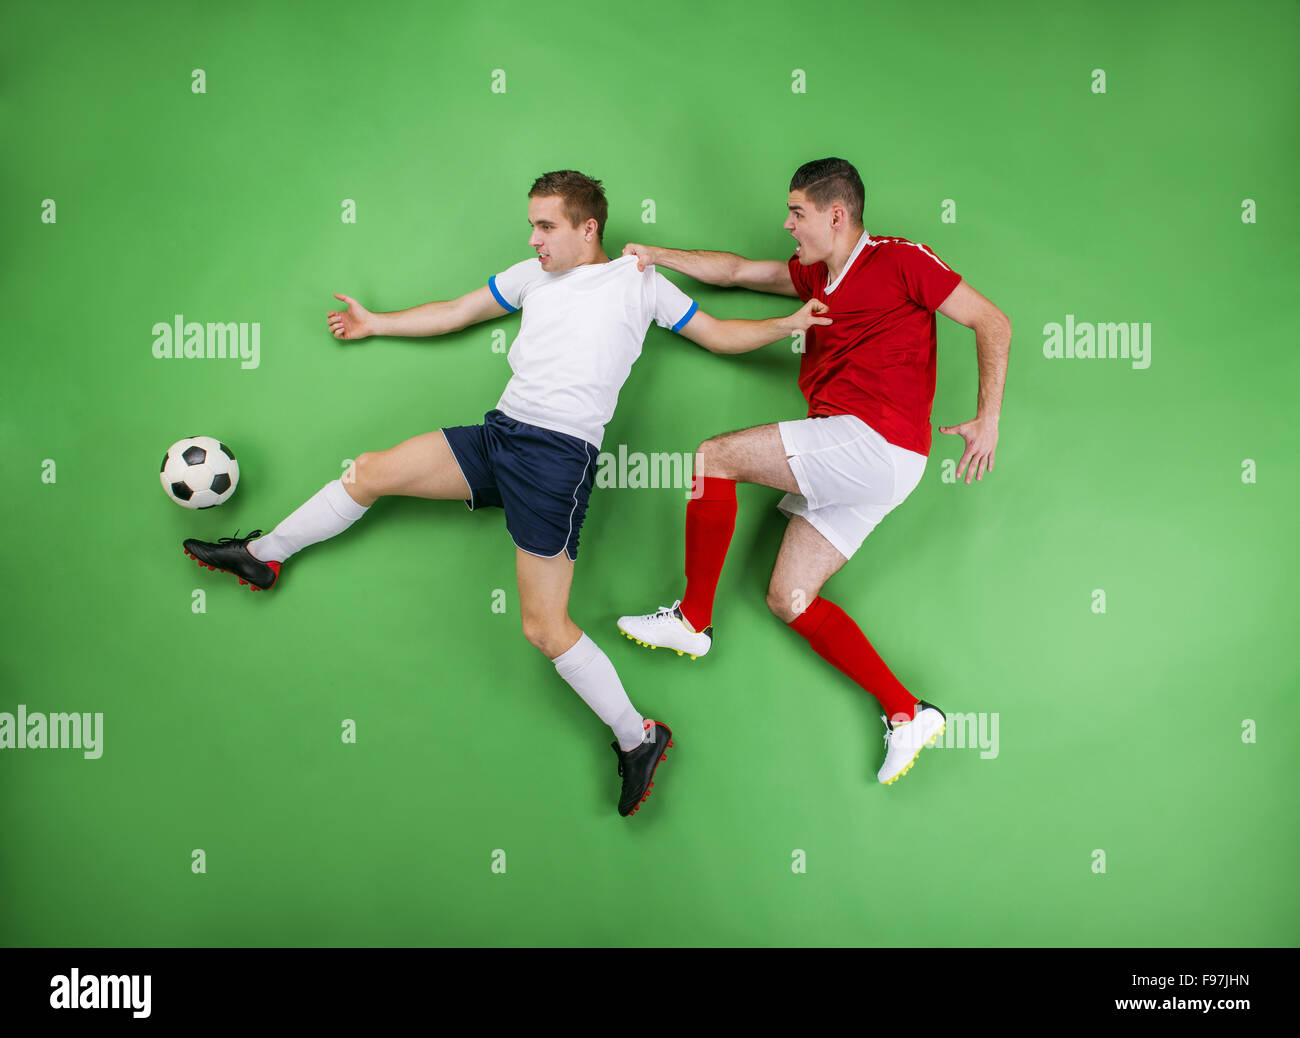 Two enthusiastic football players fighting for a ball. Studio shot on a green backgroud. Stock Photo